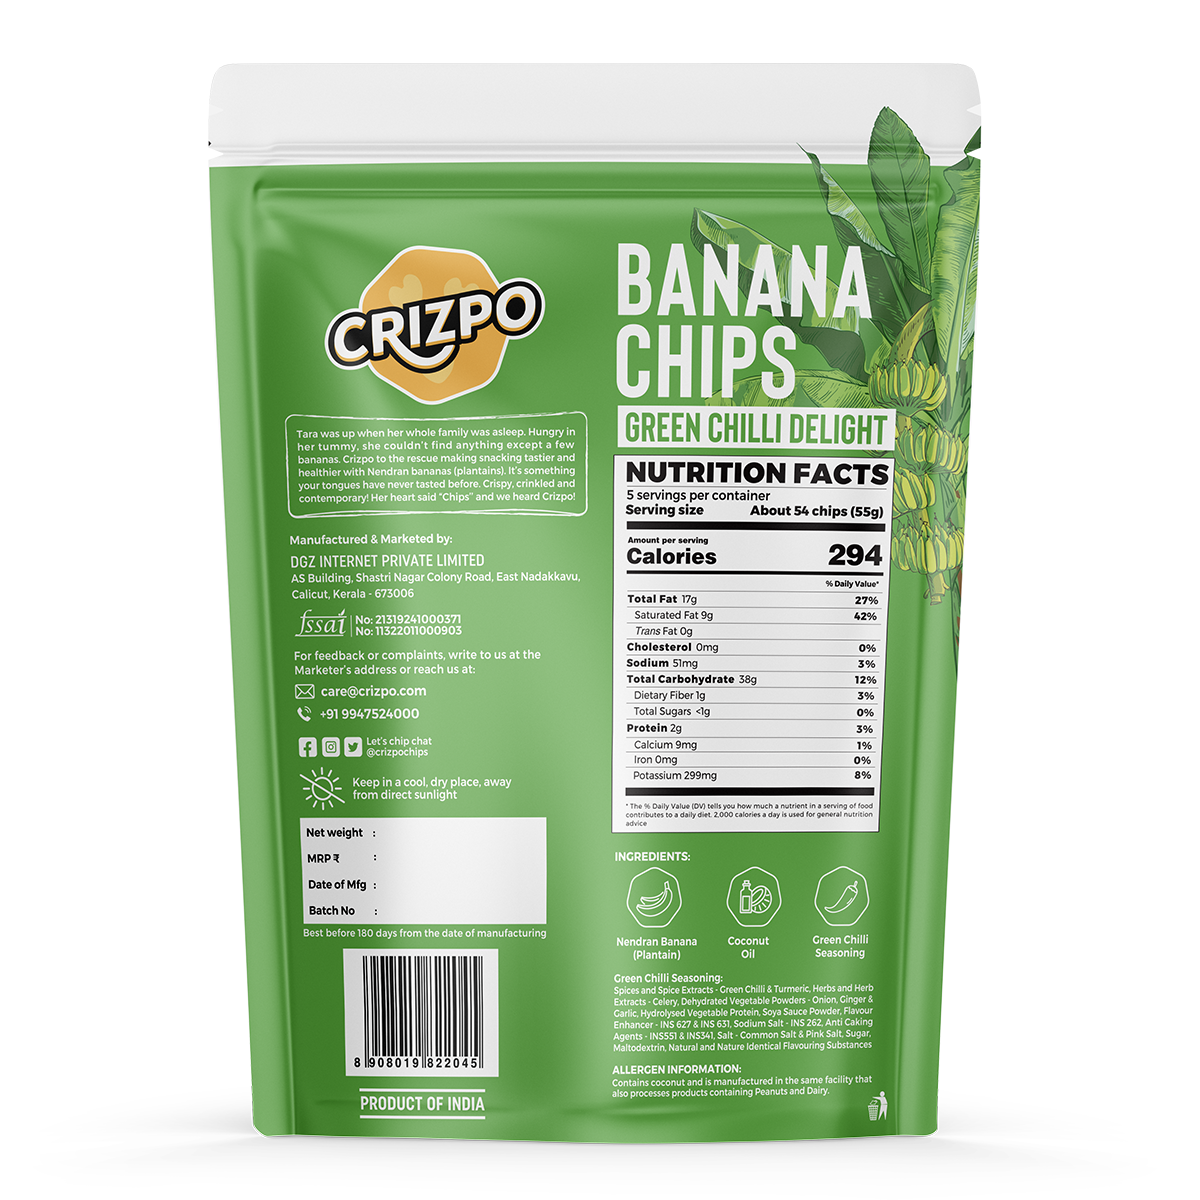 Crizpo Banana Chips - Green Chilli Delight - Pack of 3 x 110g